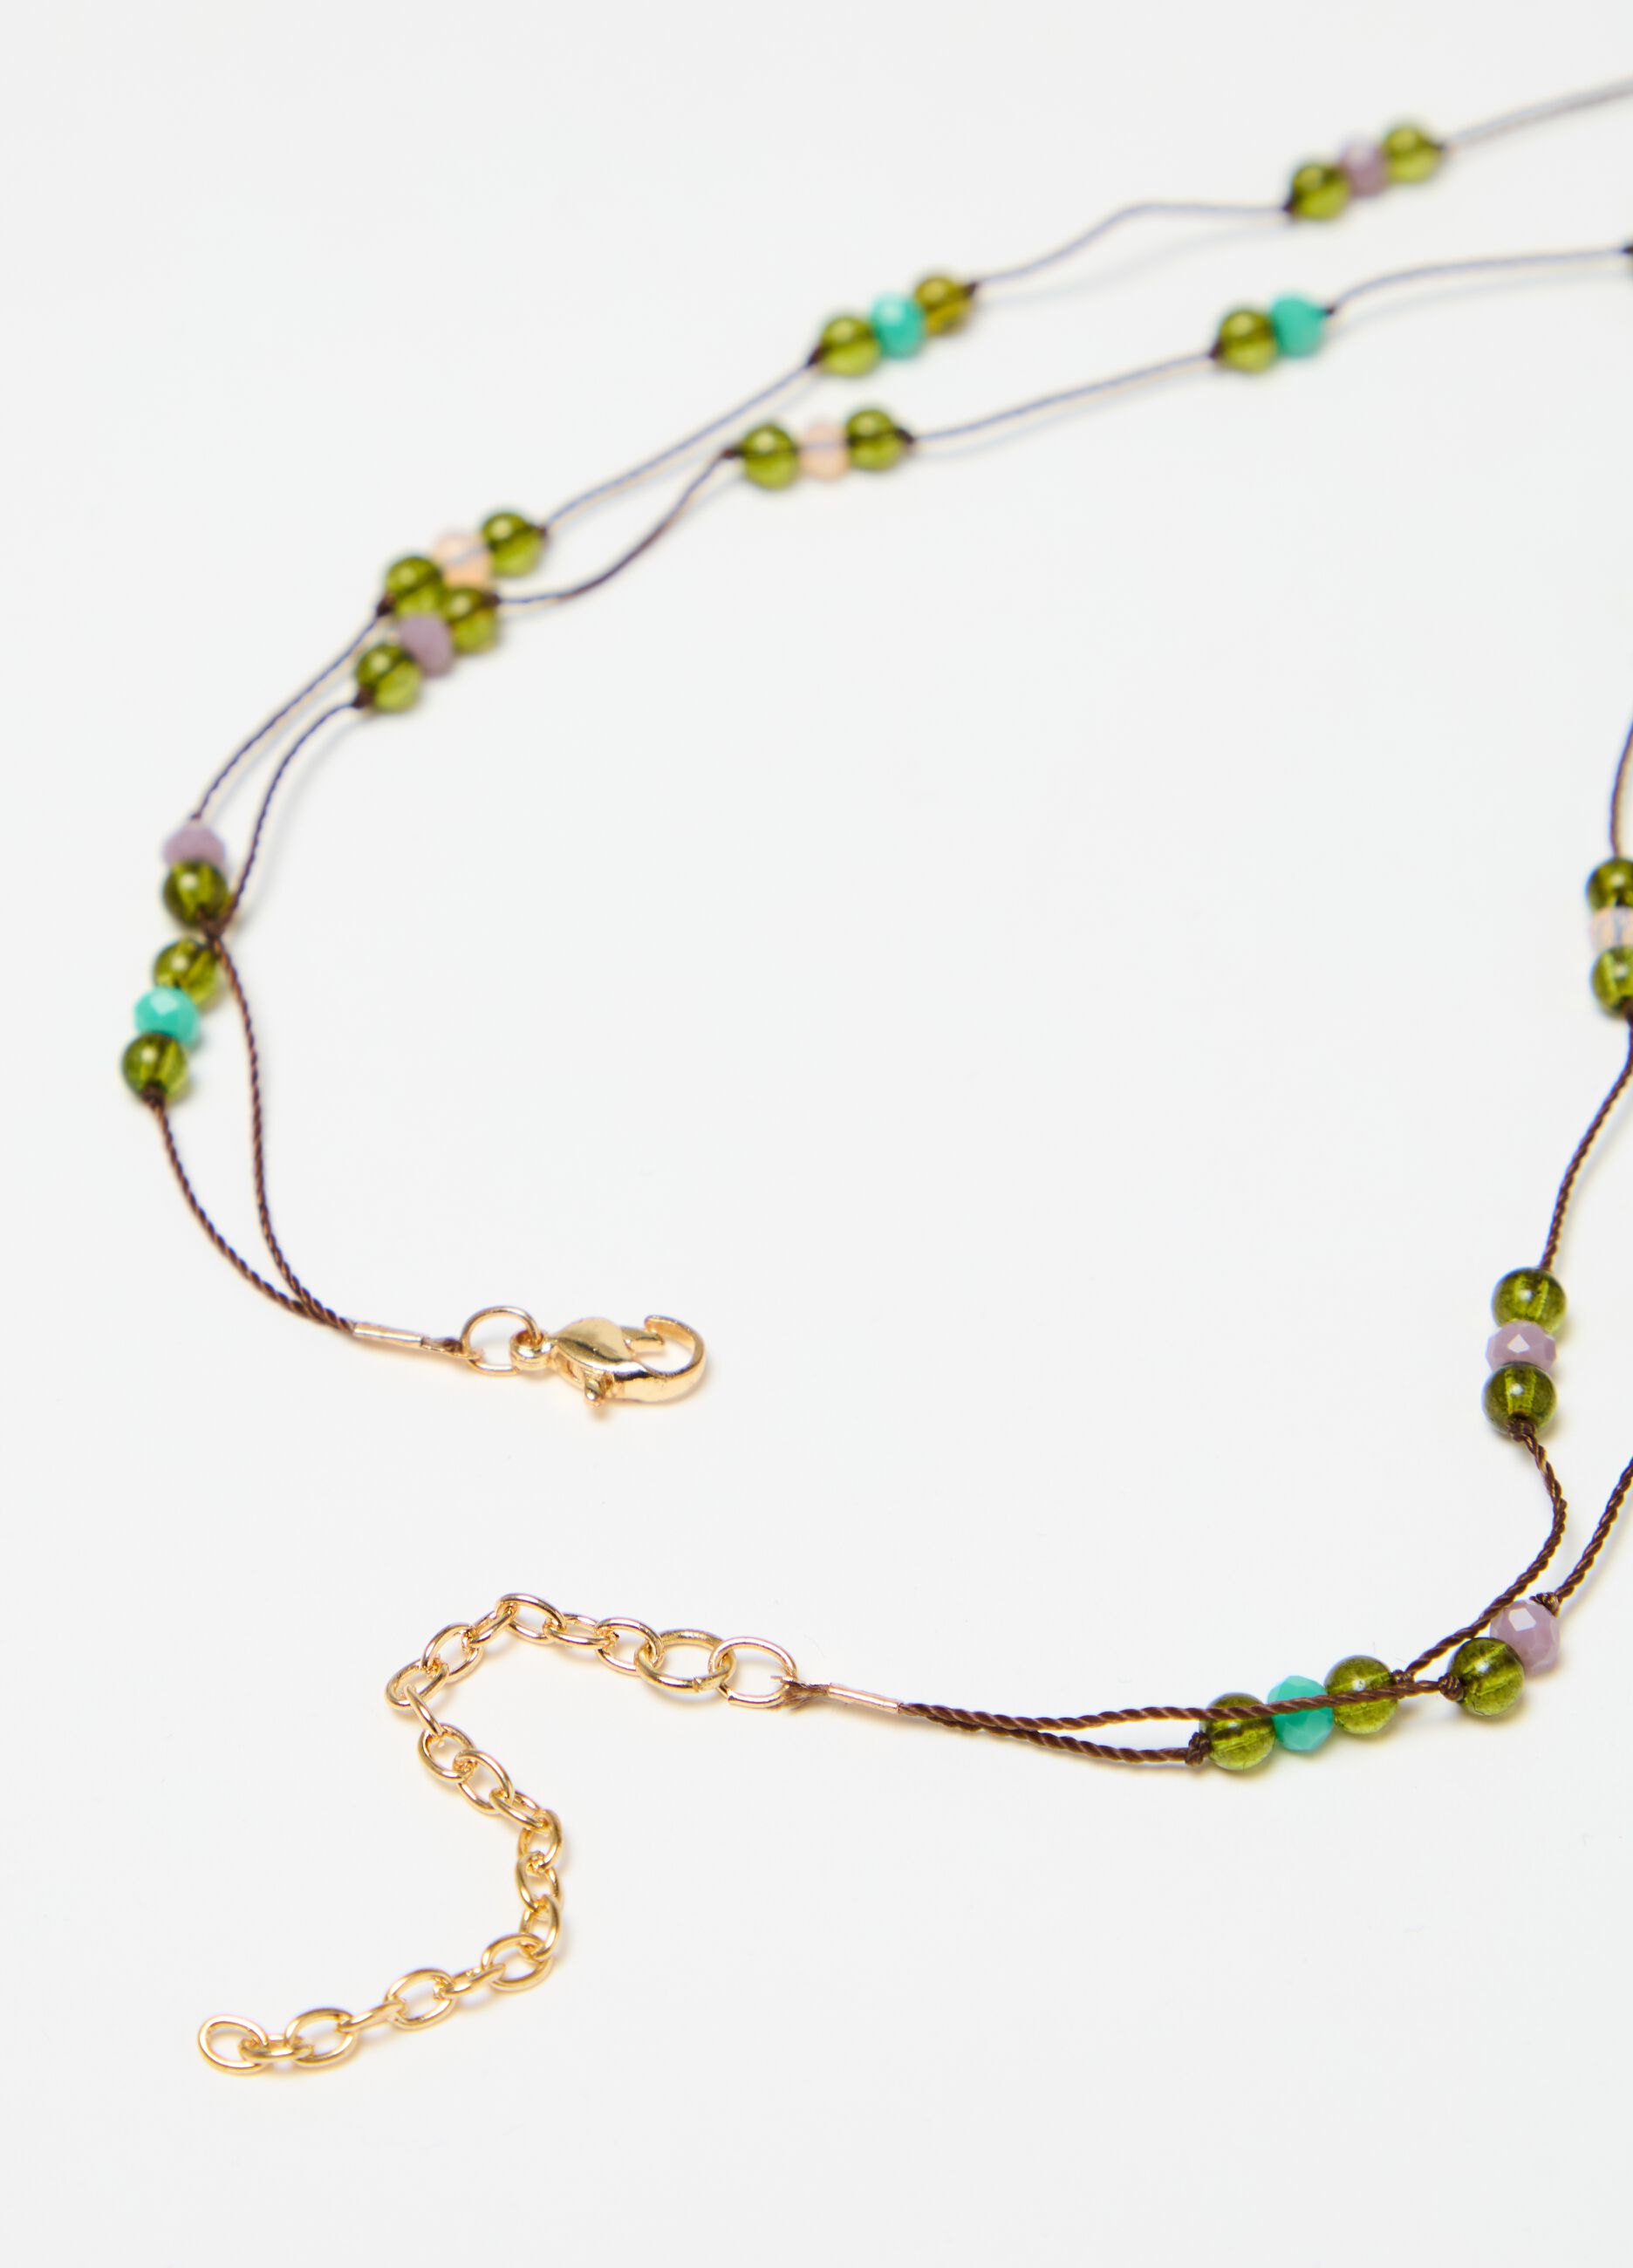 Thin multi-string necklace with pendants